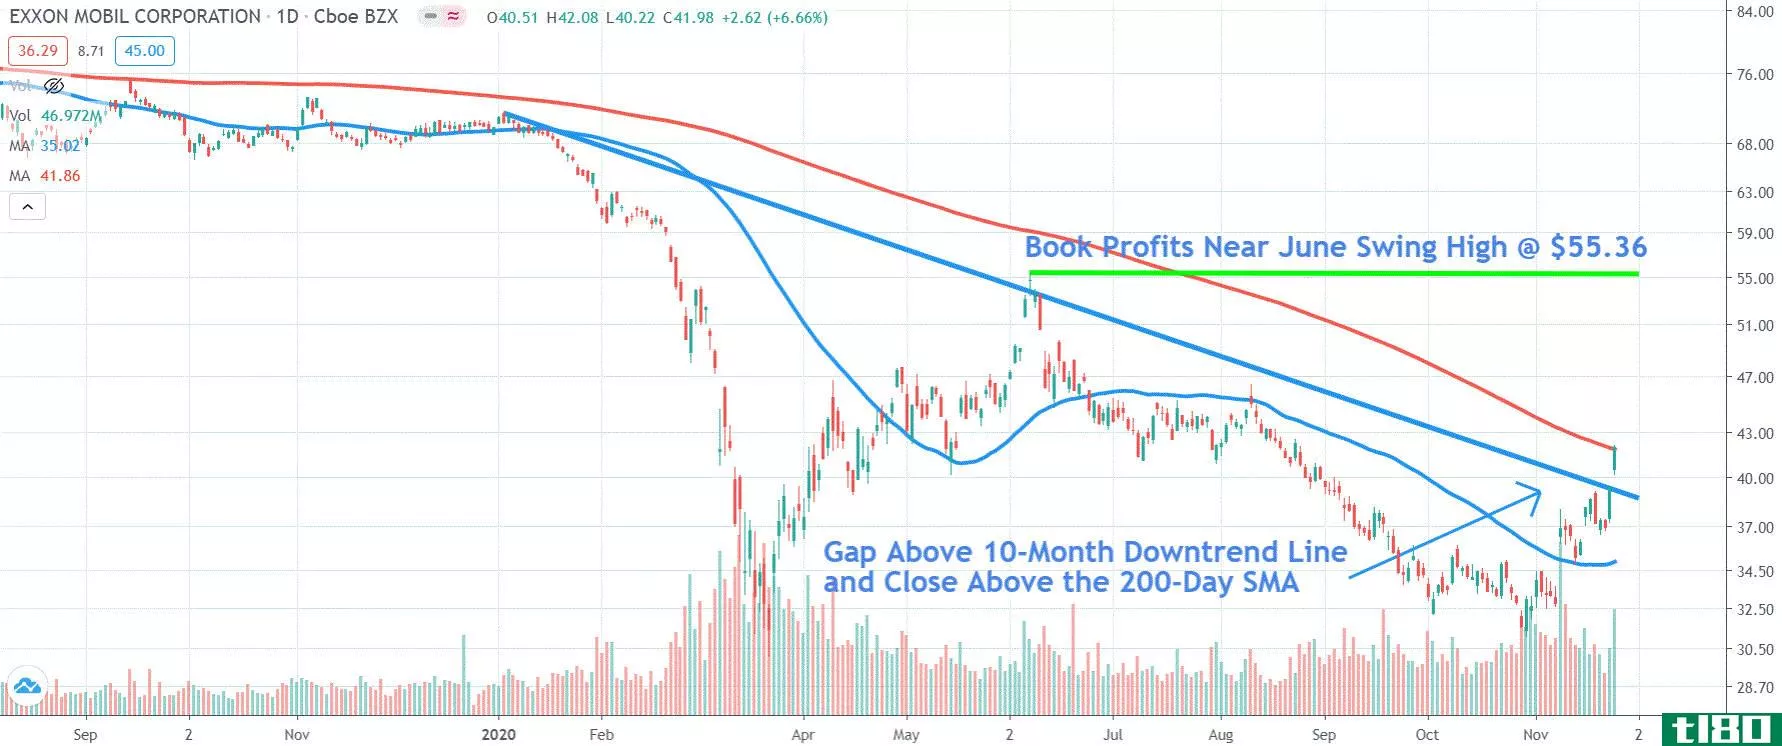 Chart depicting the share price of Exxon Mobil Corporation (XOM)